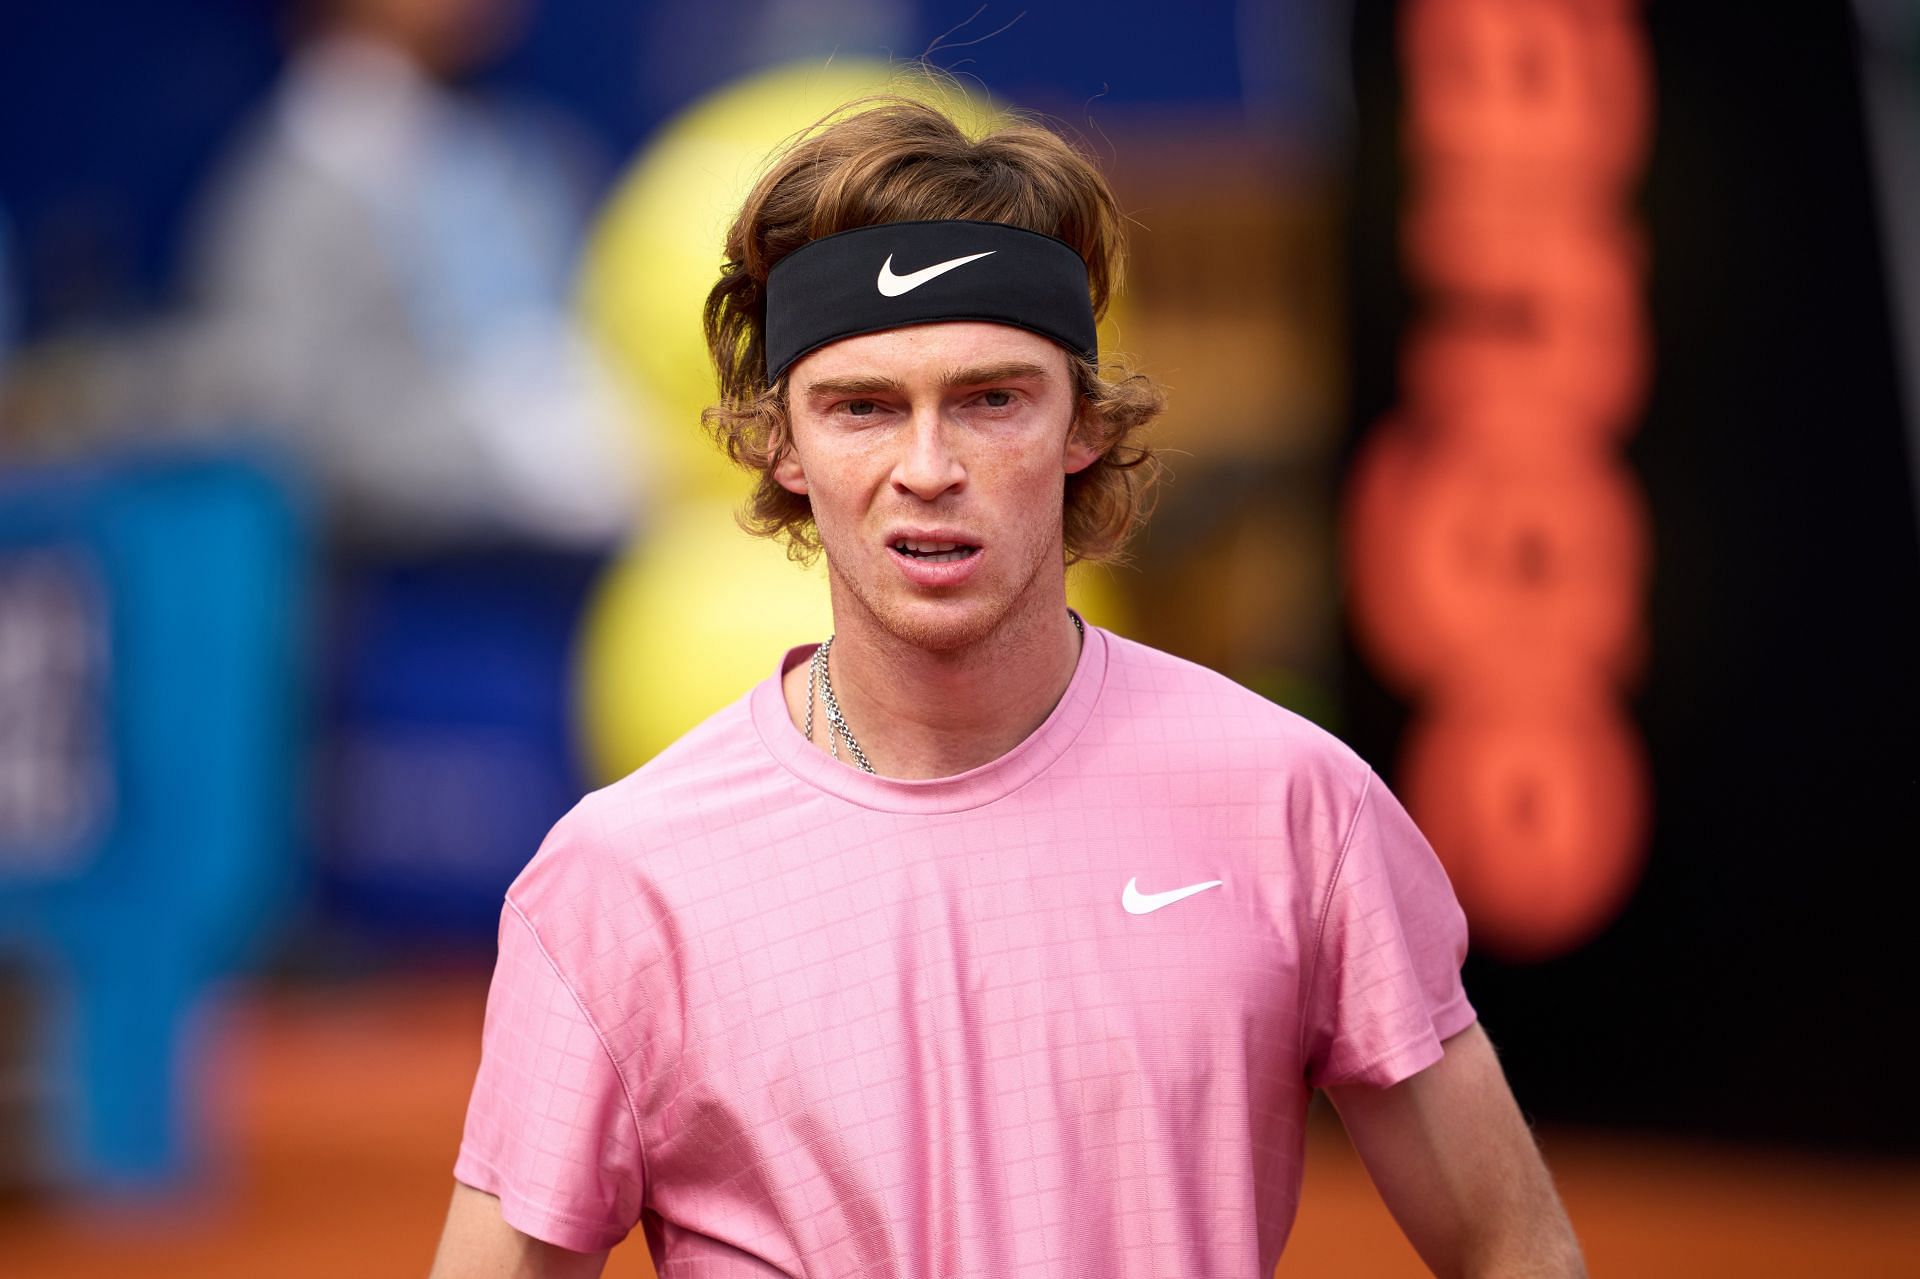 Andrey Rublev talked about the Wimbledon suspension in a recent interview